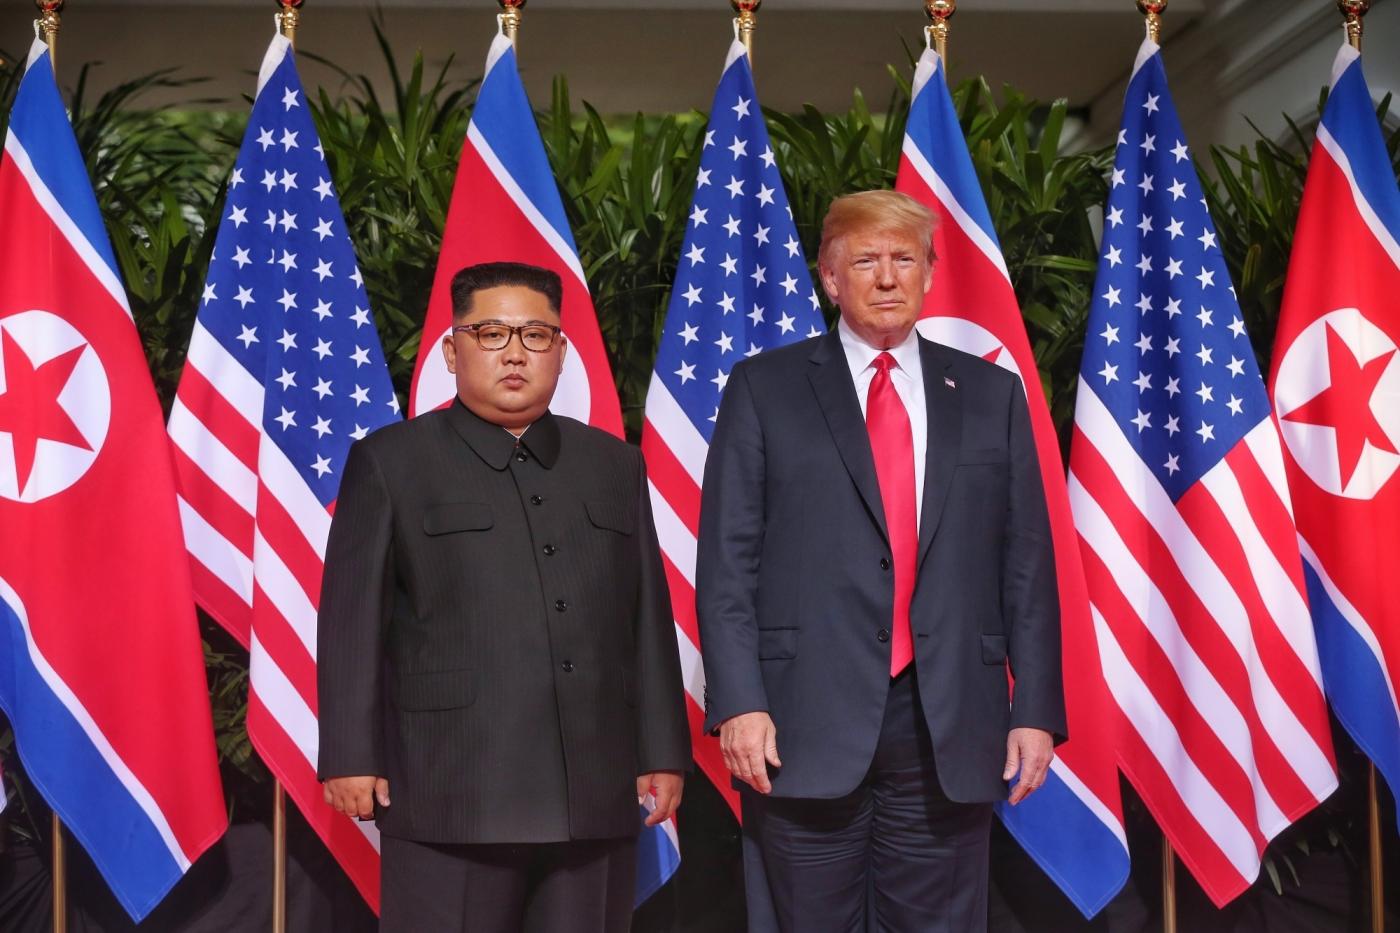 SINGAPORE, June 12, 2018 (Xinhua) -- Top leader of the Democratic People's Republic of Korea (DPRK) Kim Jong Un (L) meets with U.S. President Donald Trump in Singapore, on June 12, 2018. (Xinhua/The Straits Times/IANS) by .